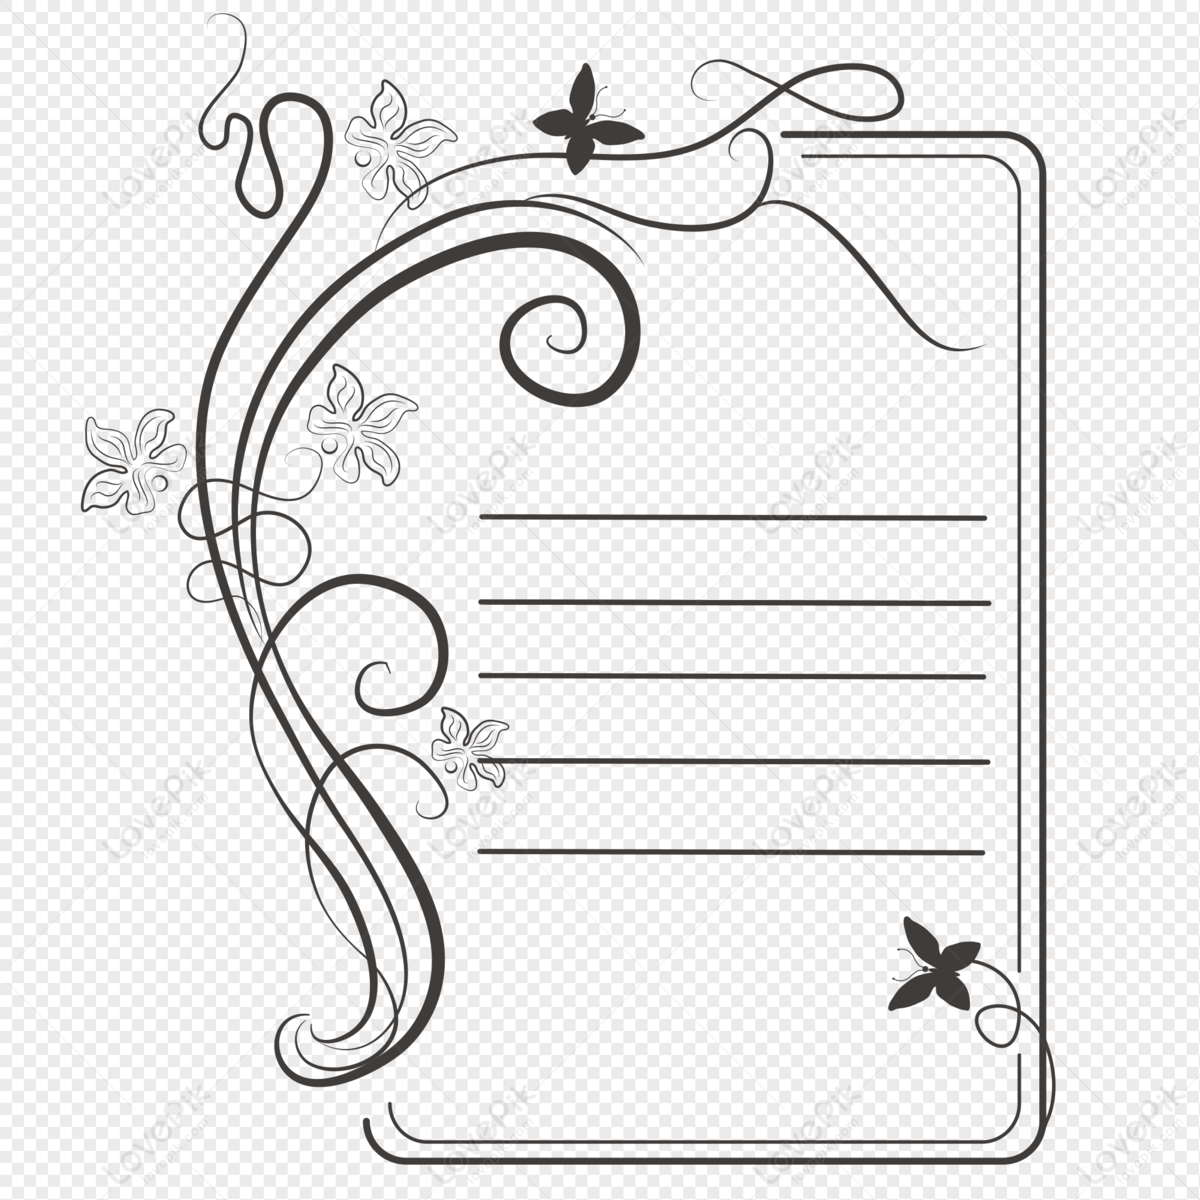 Simple Pattern Border PNG Image Free Download And Clipart Image ...